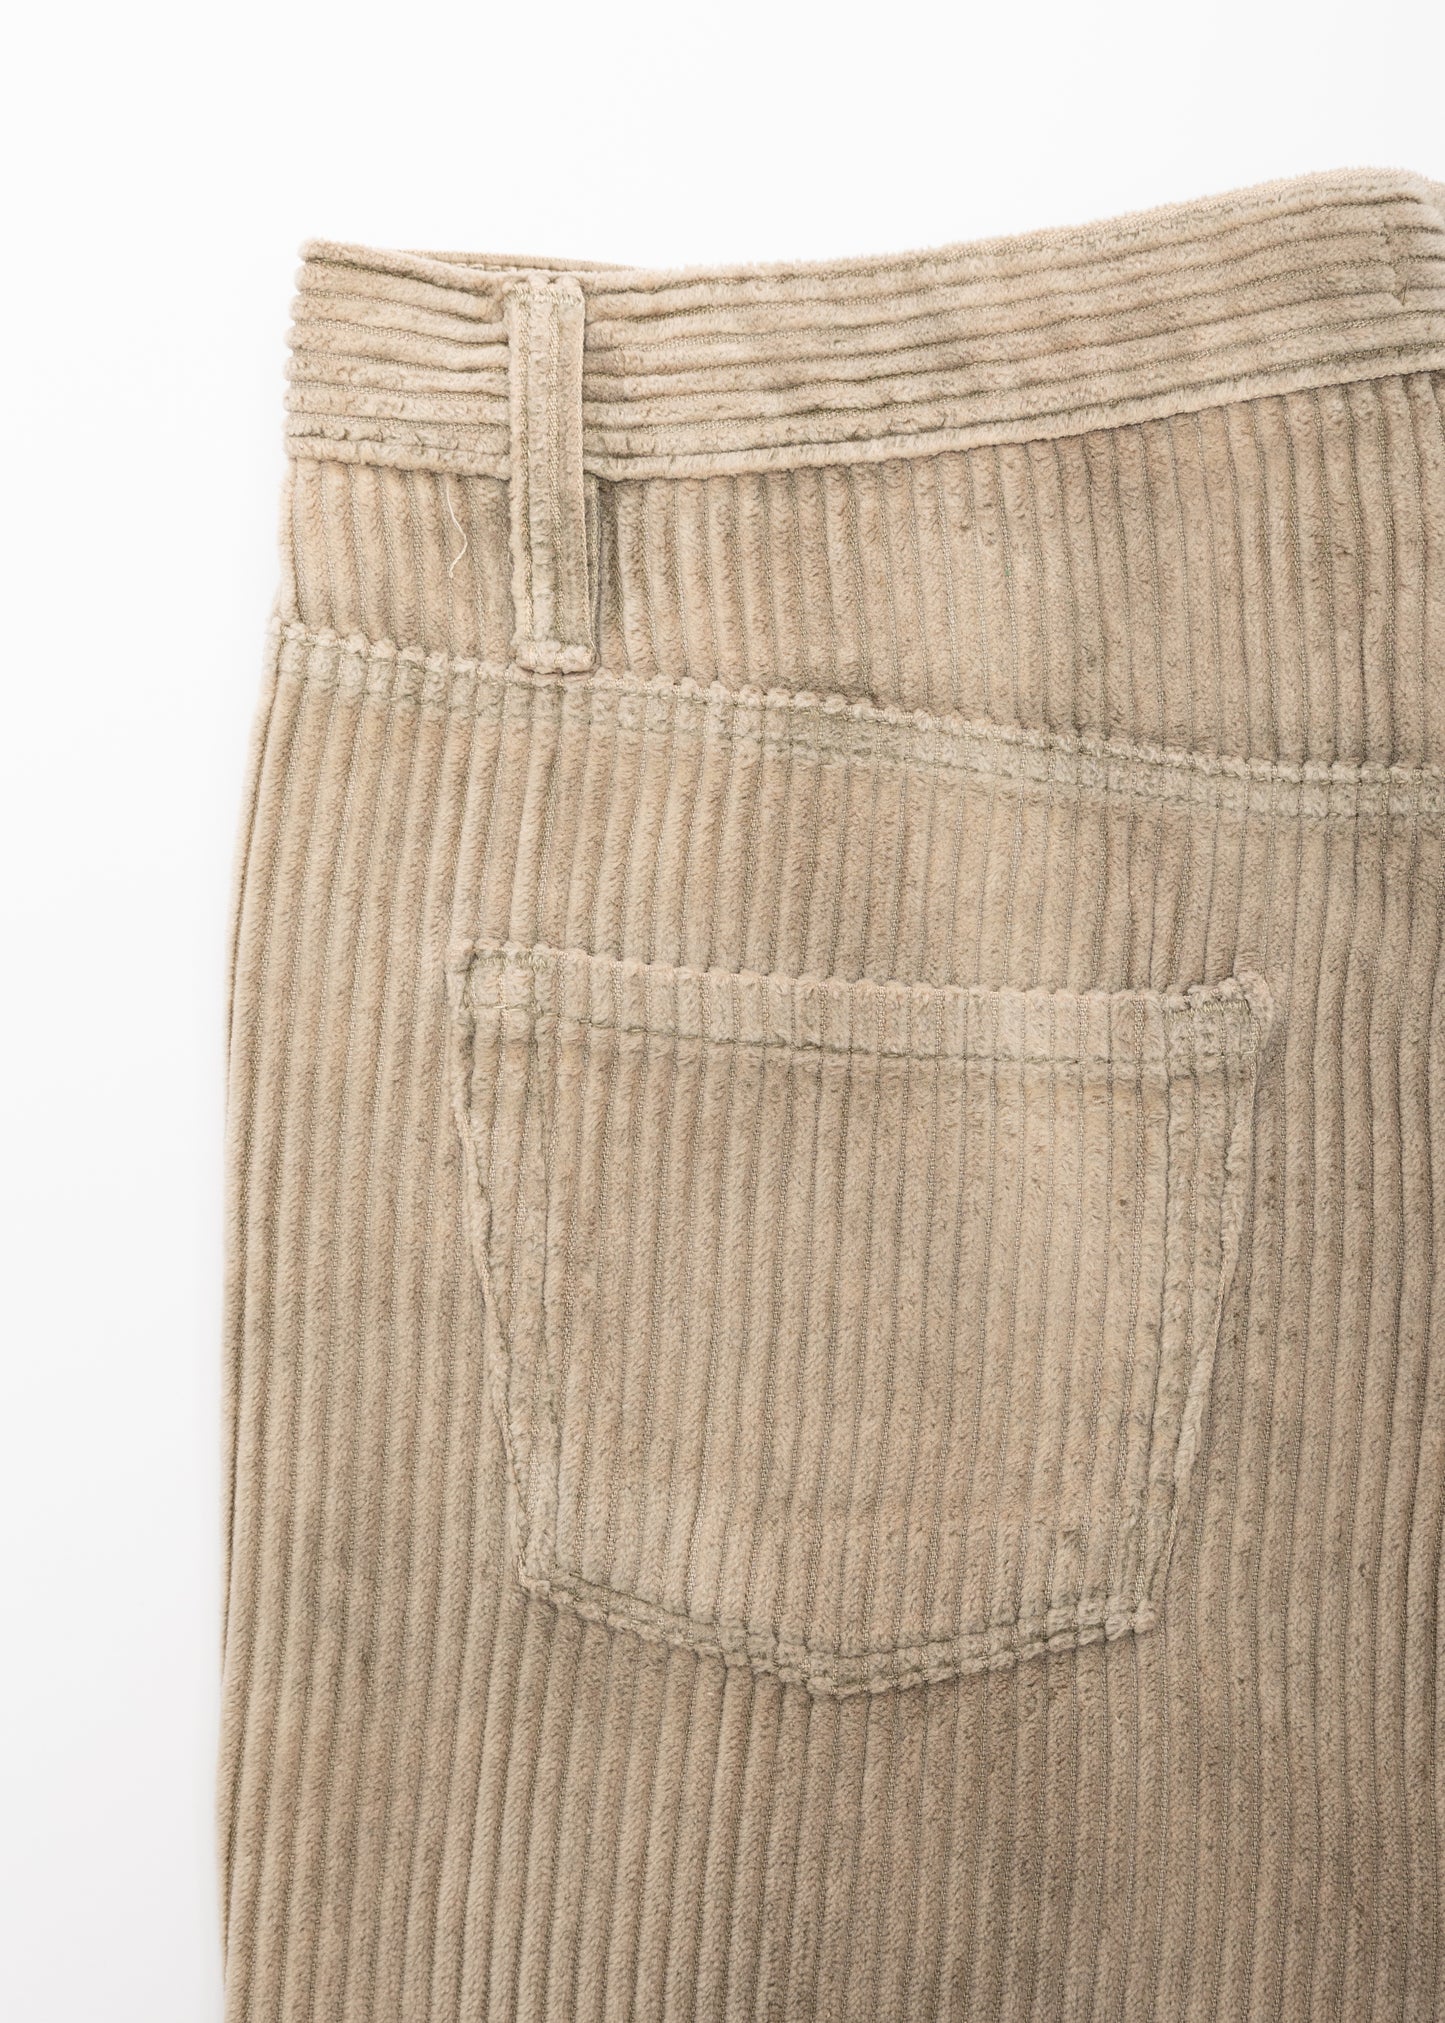 Buttermilk Washed Corduroy Pant